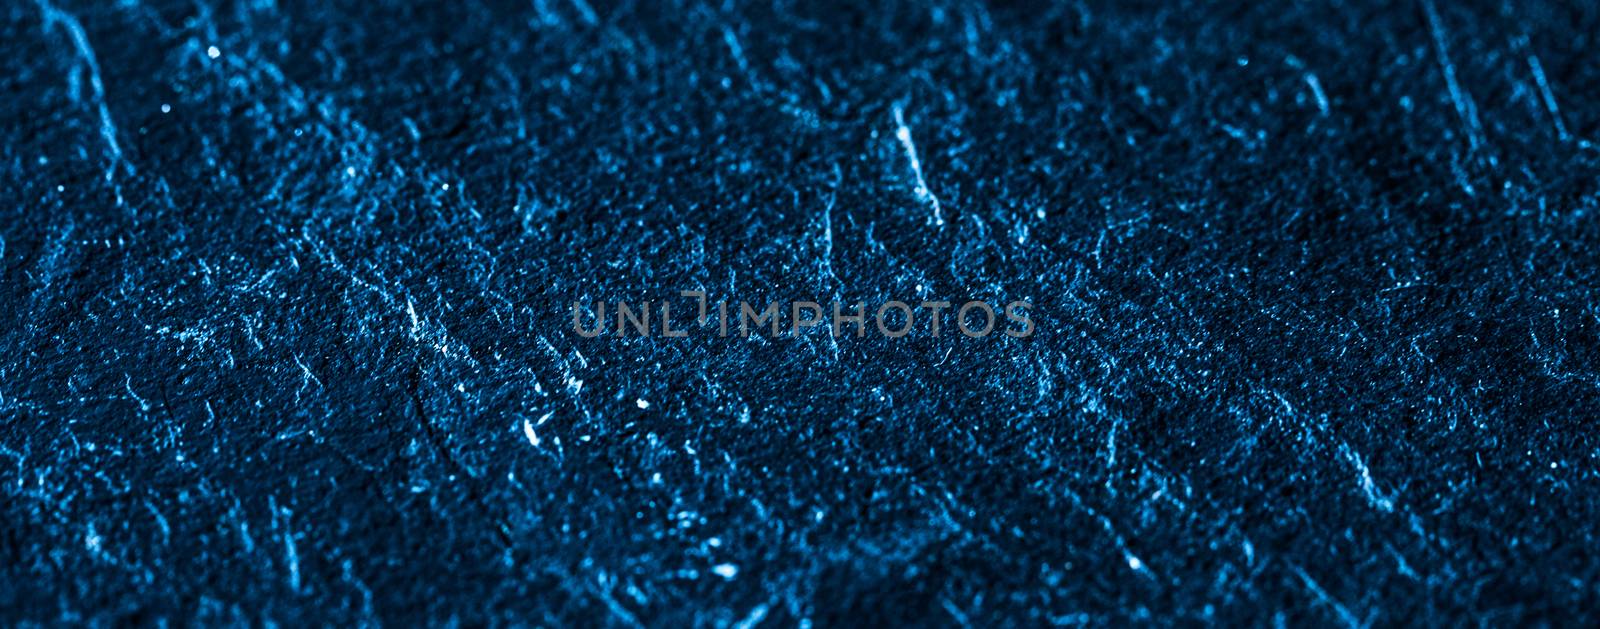 Blue stone texture as abstract background, design material and textured surfaces